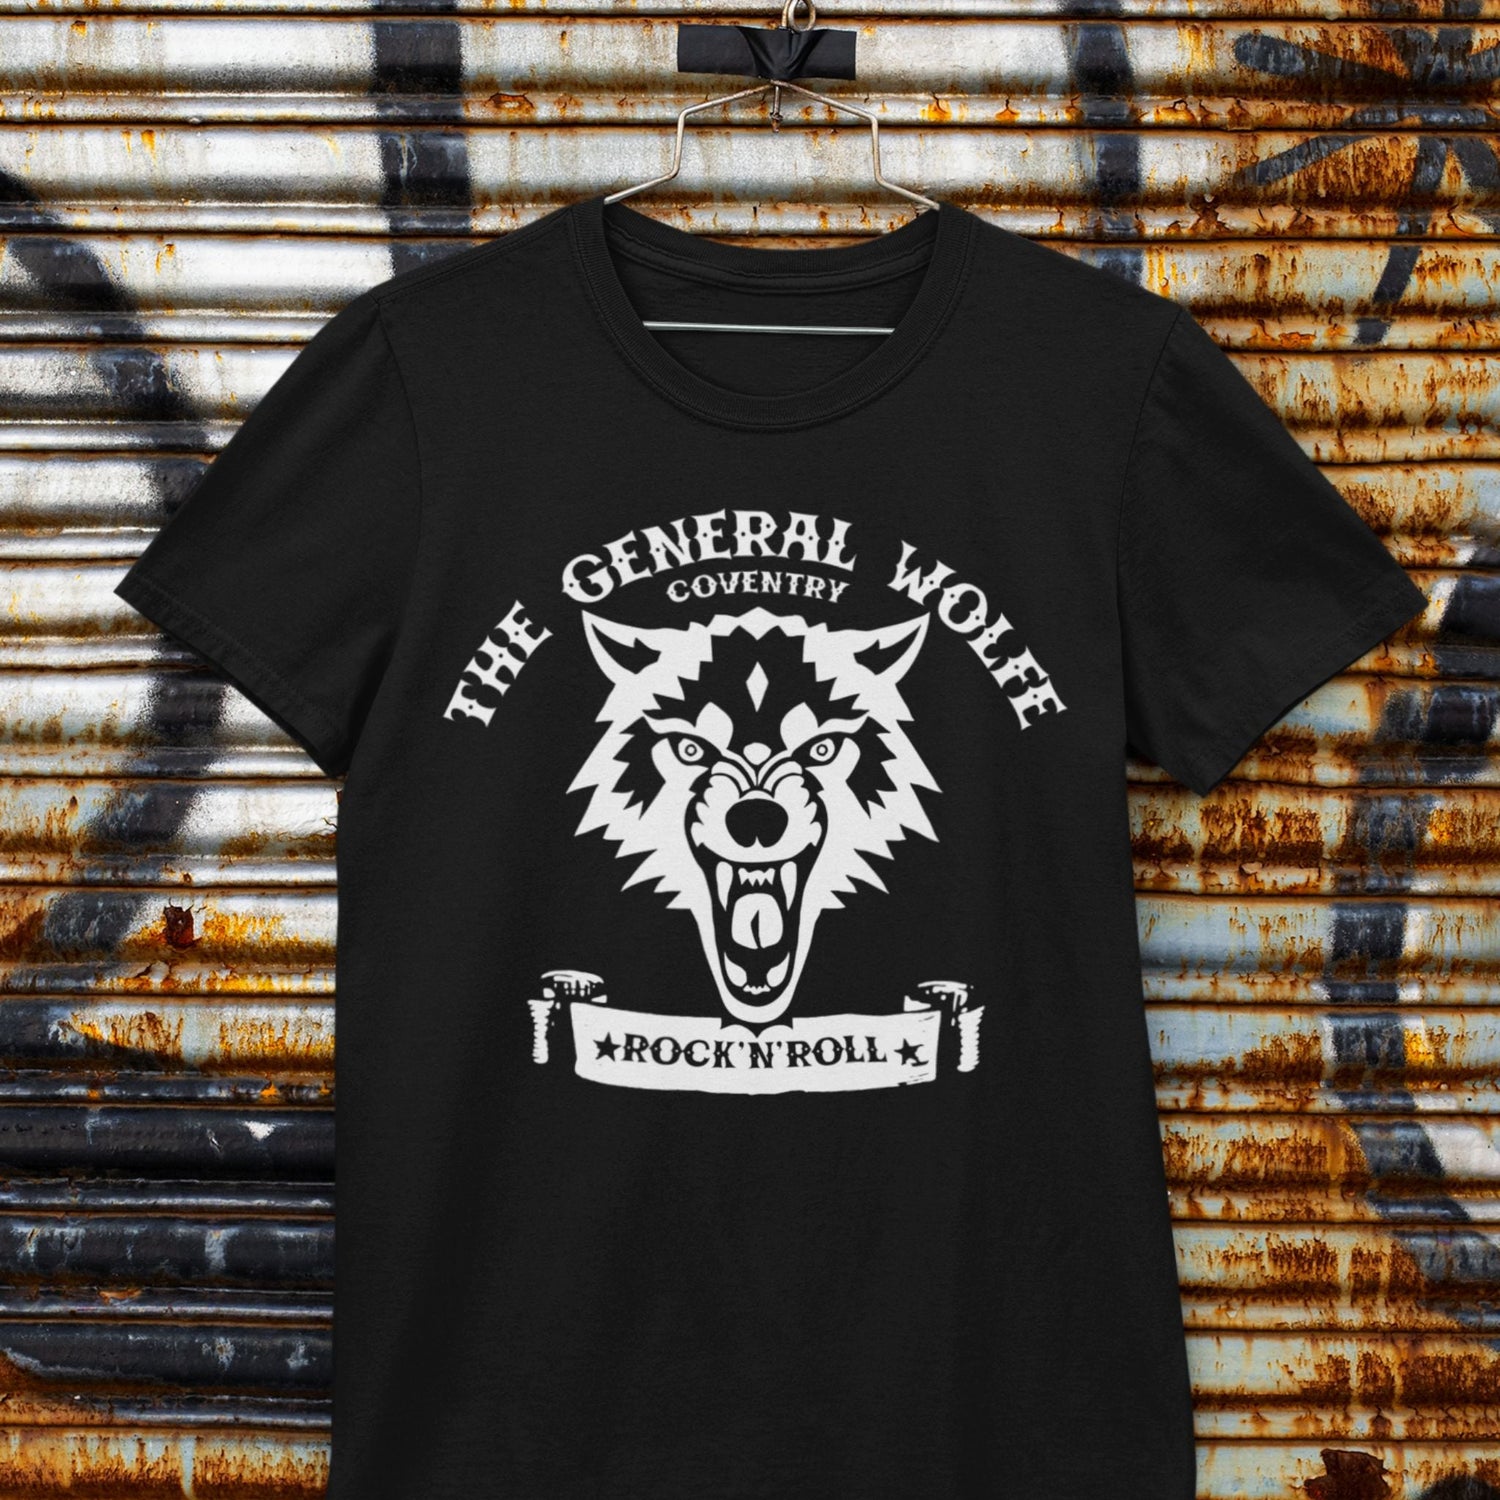 The General Wolfe - Coventry